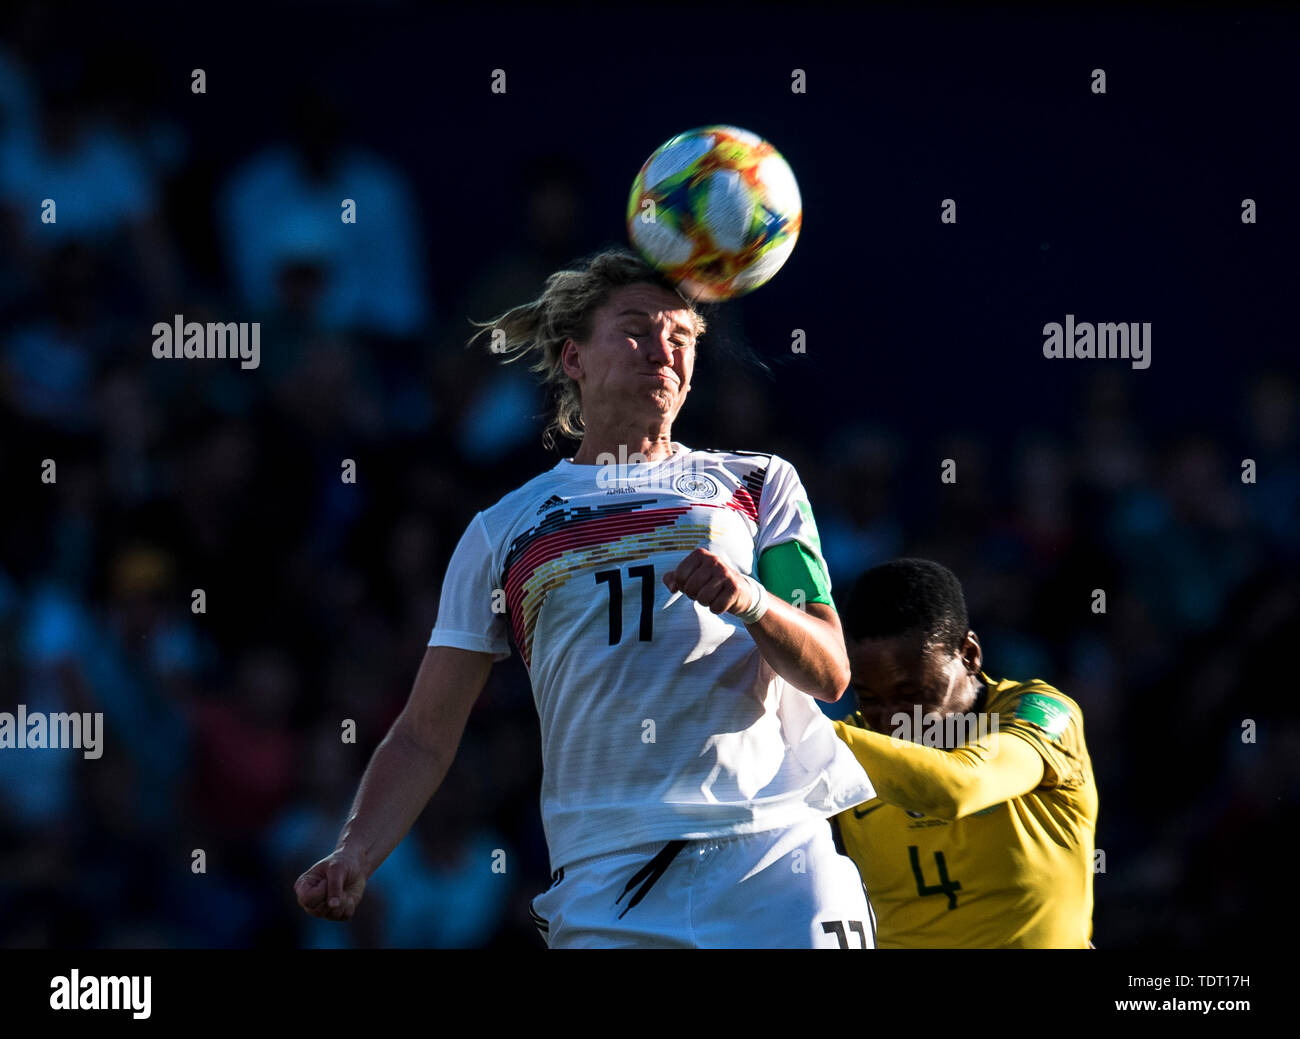 Montpellier. 17th June, 2019. Alexandra Popp (L) of Germany competes during the group B match between Germany and South Africa at the 2019 FIFA Women's World Cup in Montpellier, France on June 17, 2019. Credit: Xiao Yijiu/Xinhua/Alamy Live News Stock Photo